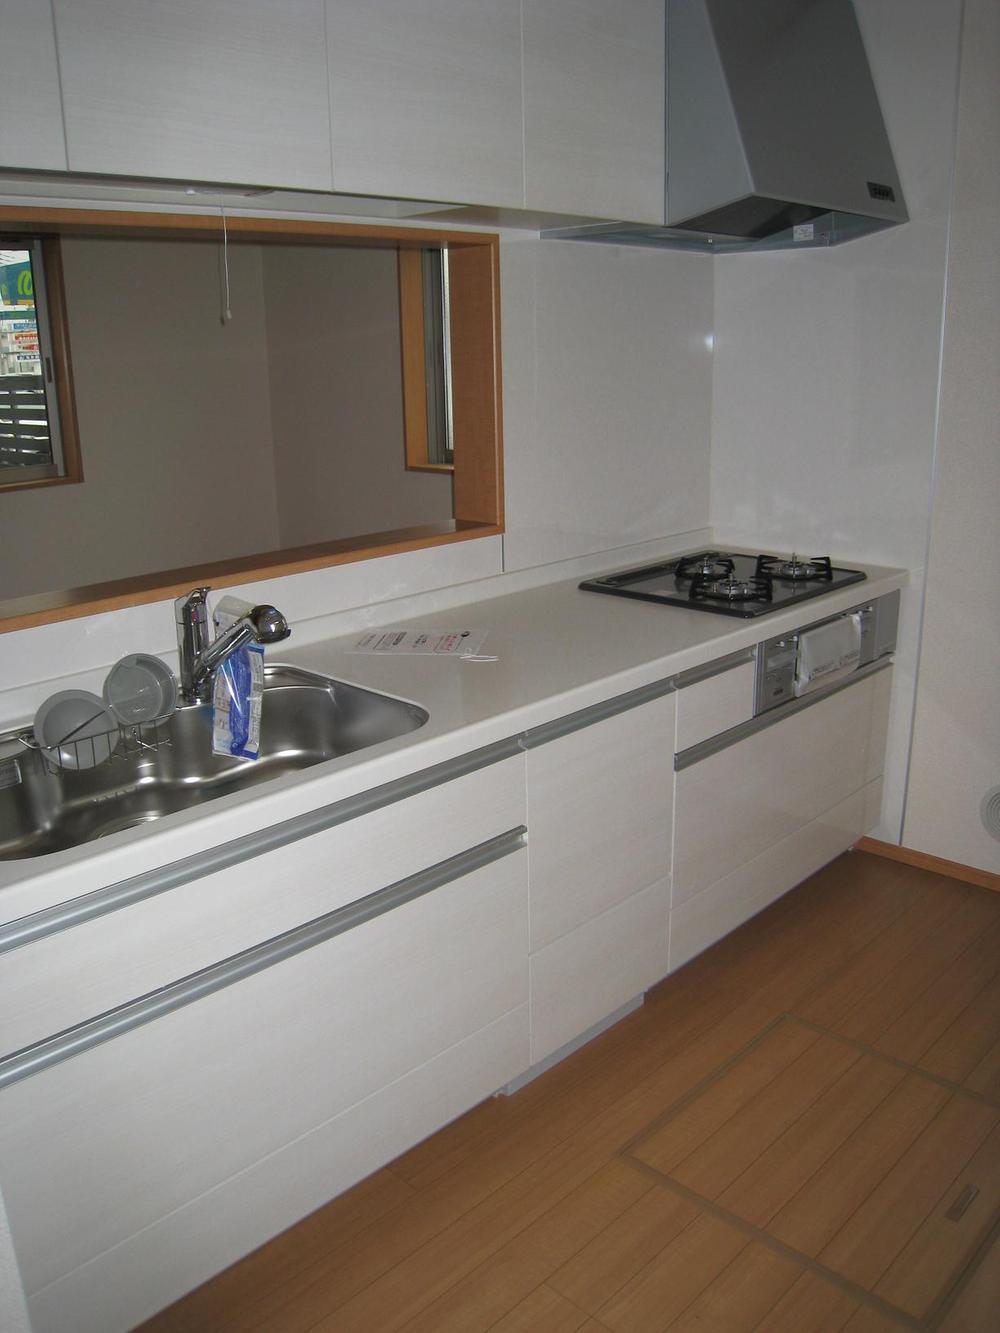 Same specifications photo (kitchen). Same specifications, There is color difference